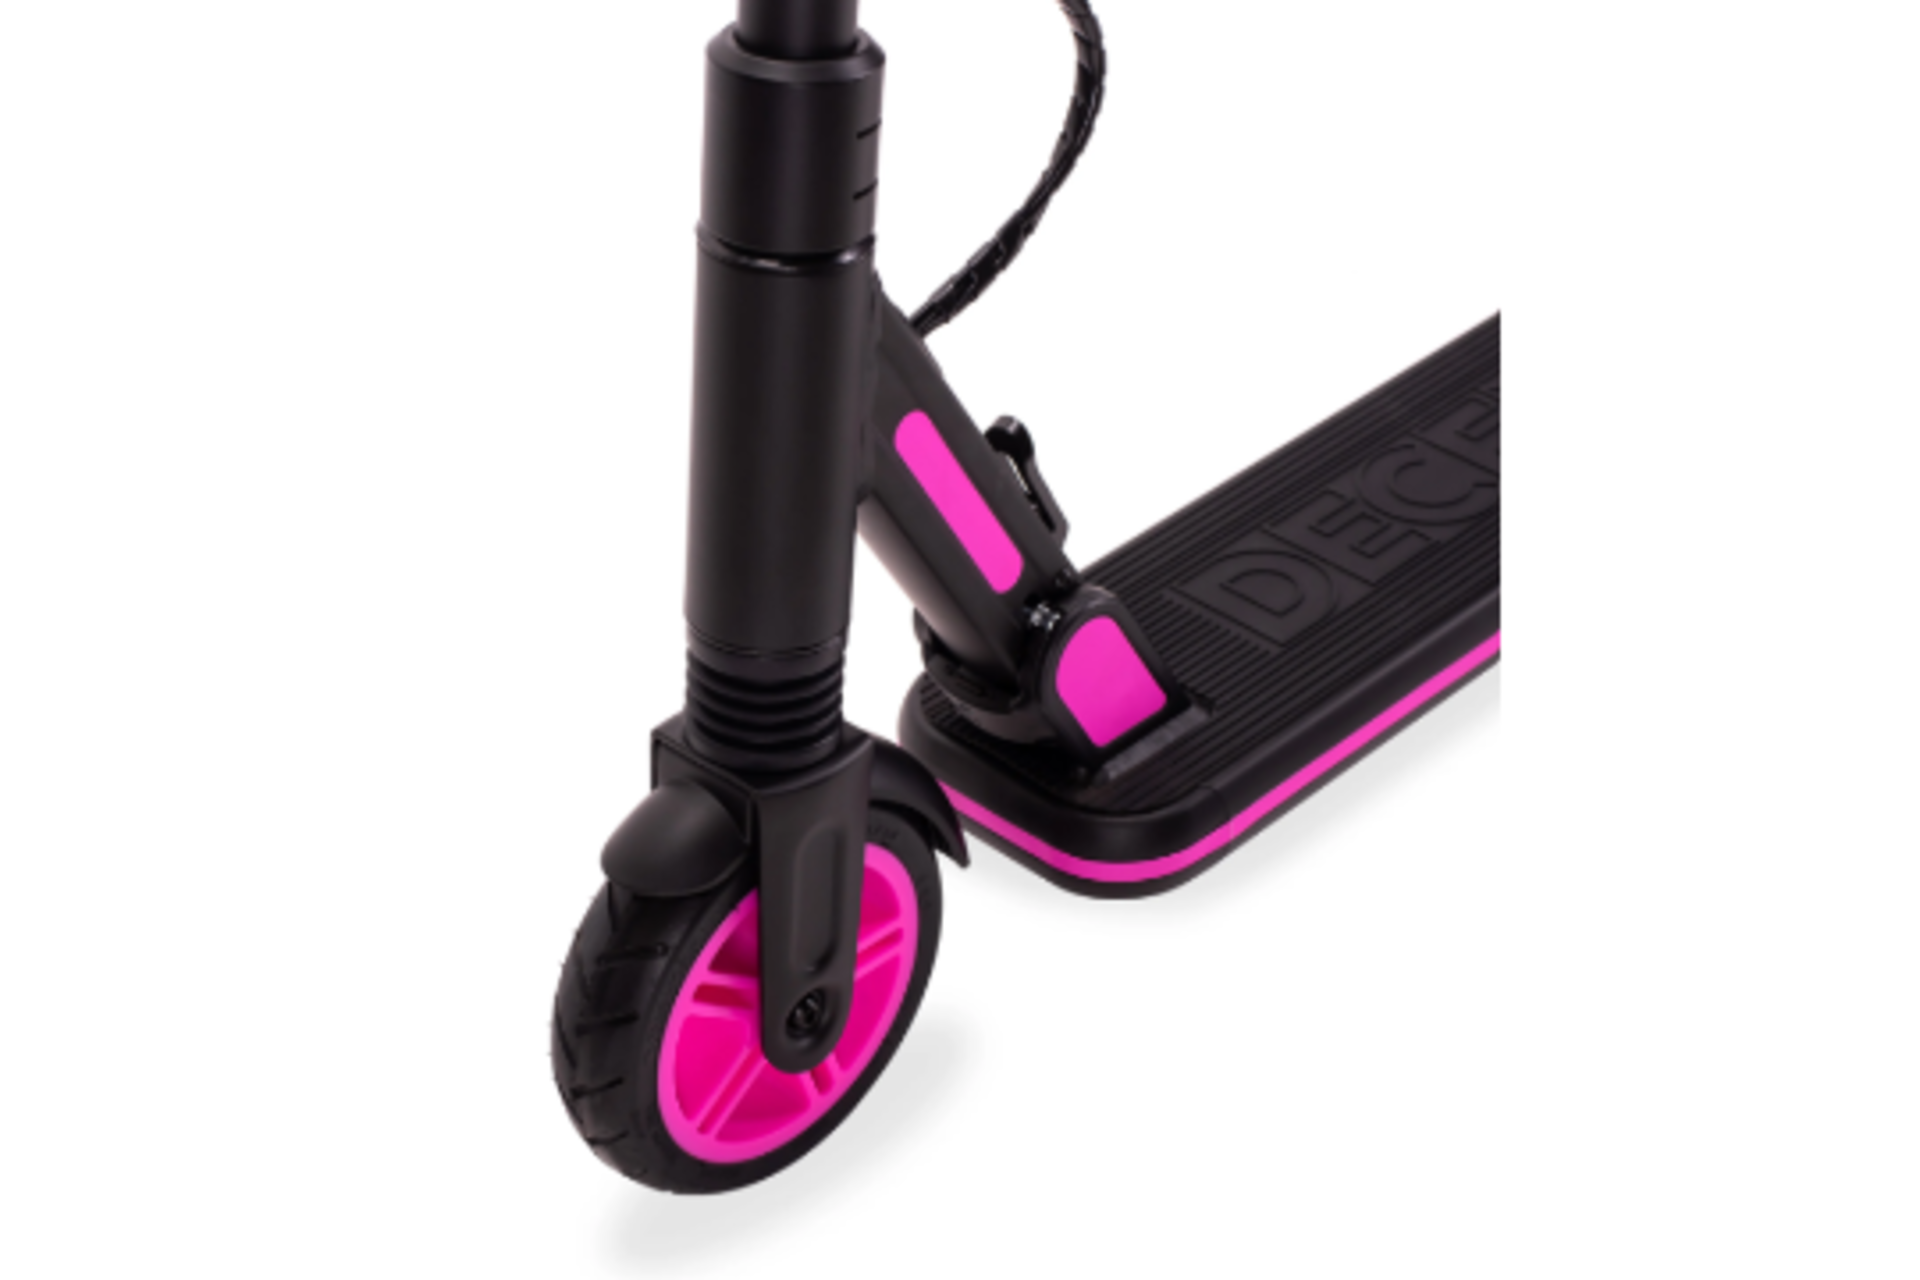 New &Boxed DECENT Kids Electric Scooter - Black/Pink. Let your kids zip around in style. With this - Image 3 of 3